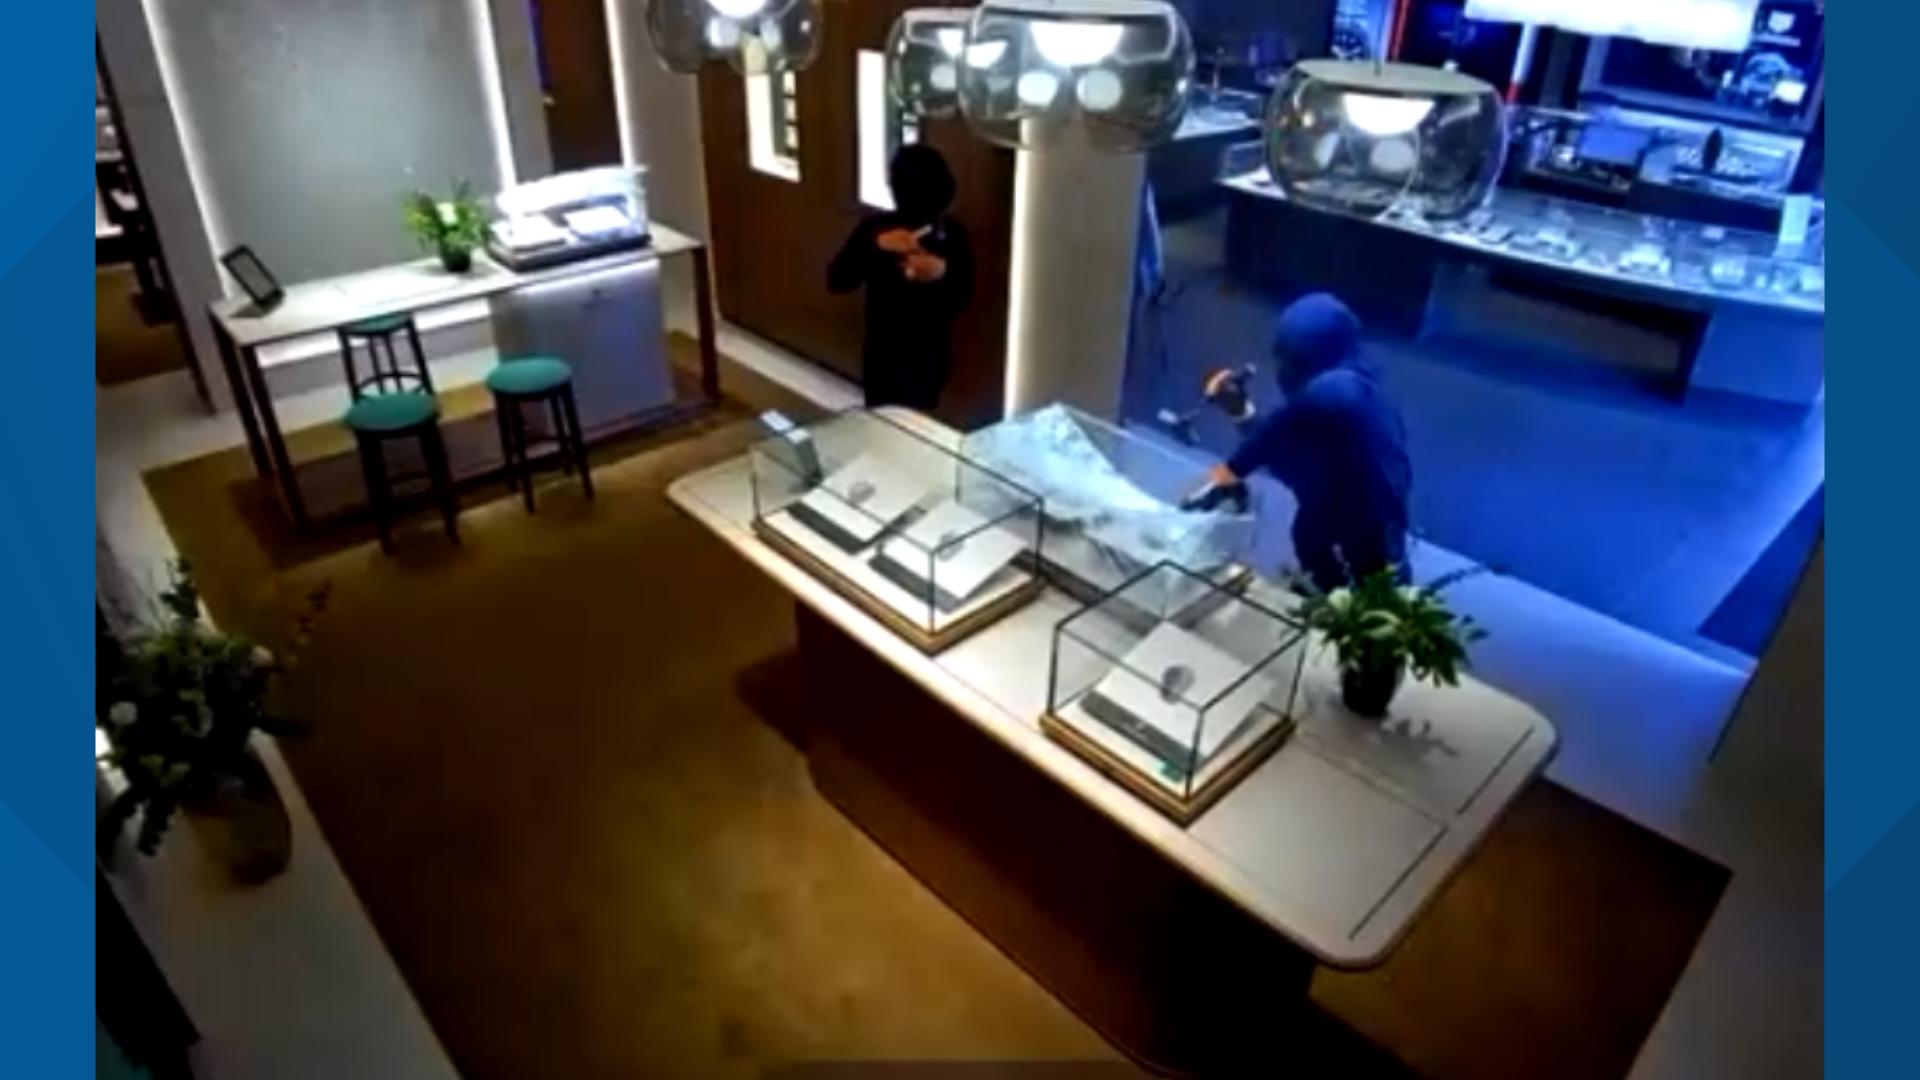 Two suspects burglarized the Lux, Bond & Green jewelry store in Westport on Thursday. The employees hid in the back. Credit: Lux, Bond & Green and the Westport PD.